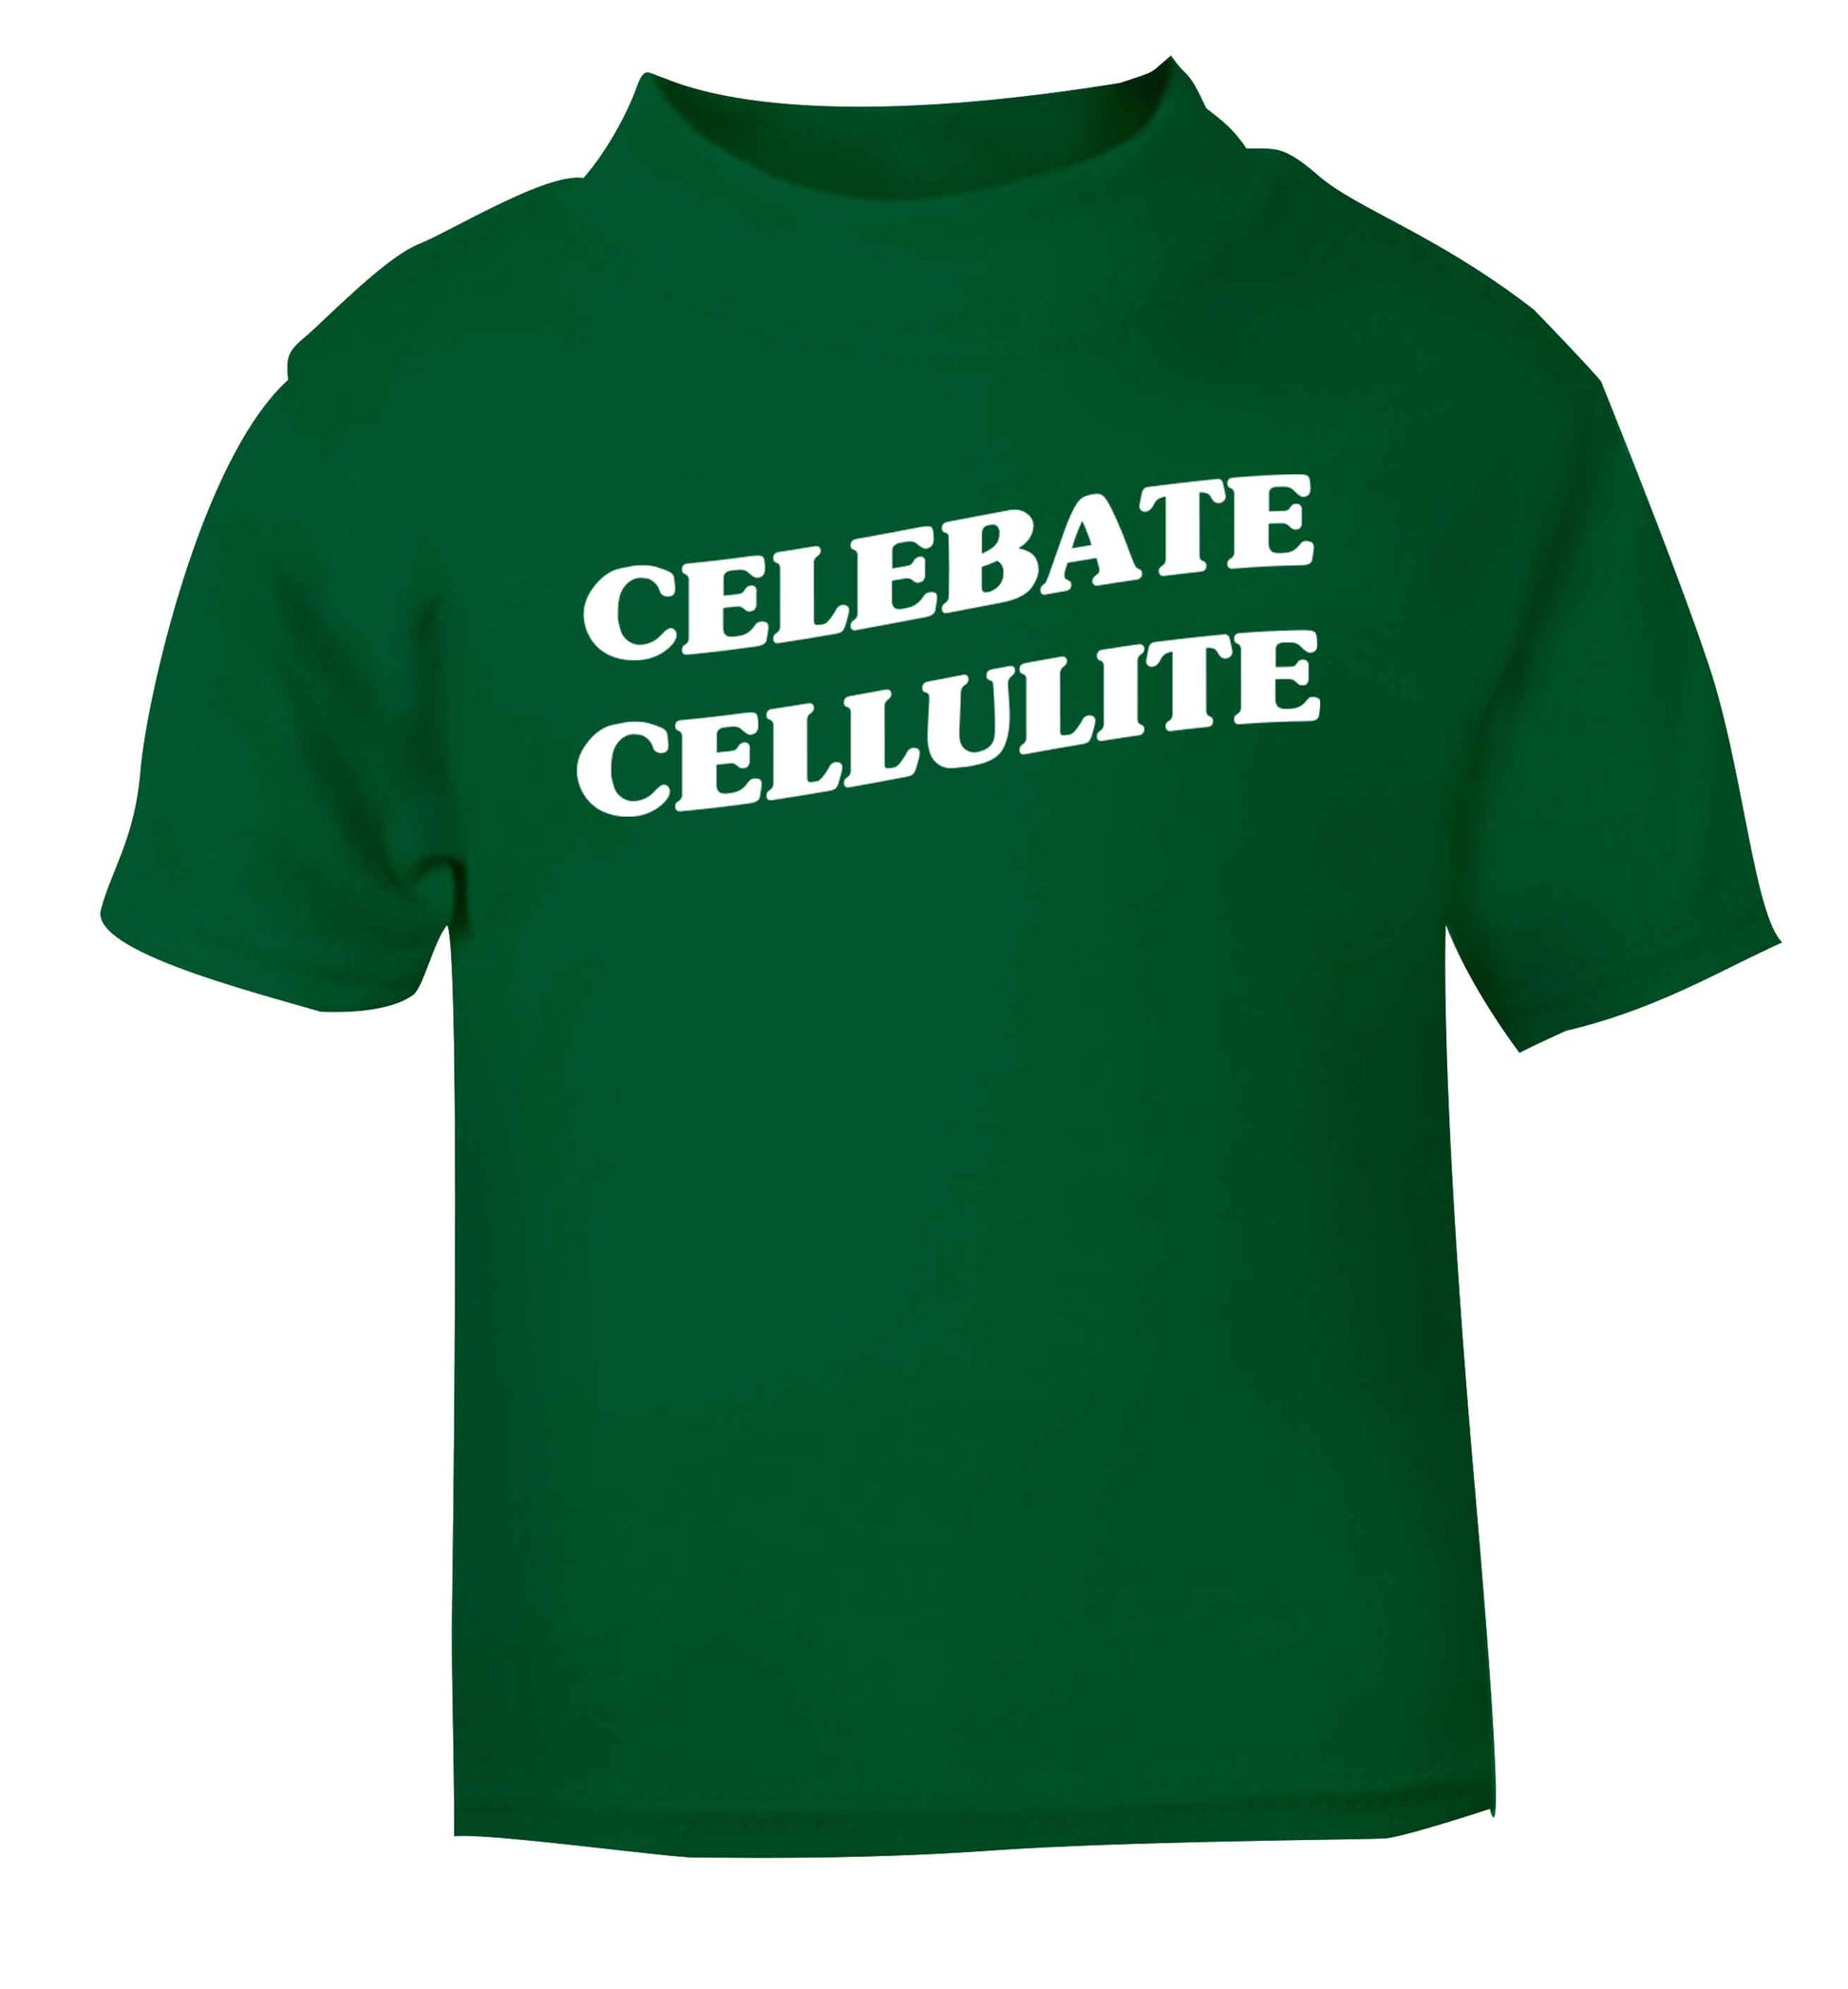 Celebrate cellulite green baby toddler Tshirt 2 Years